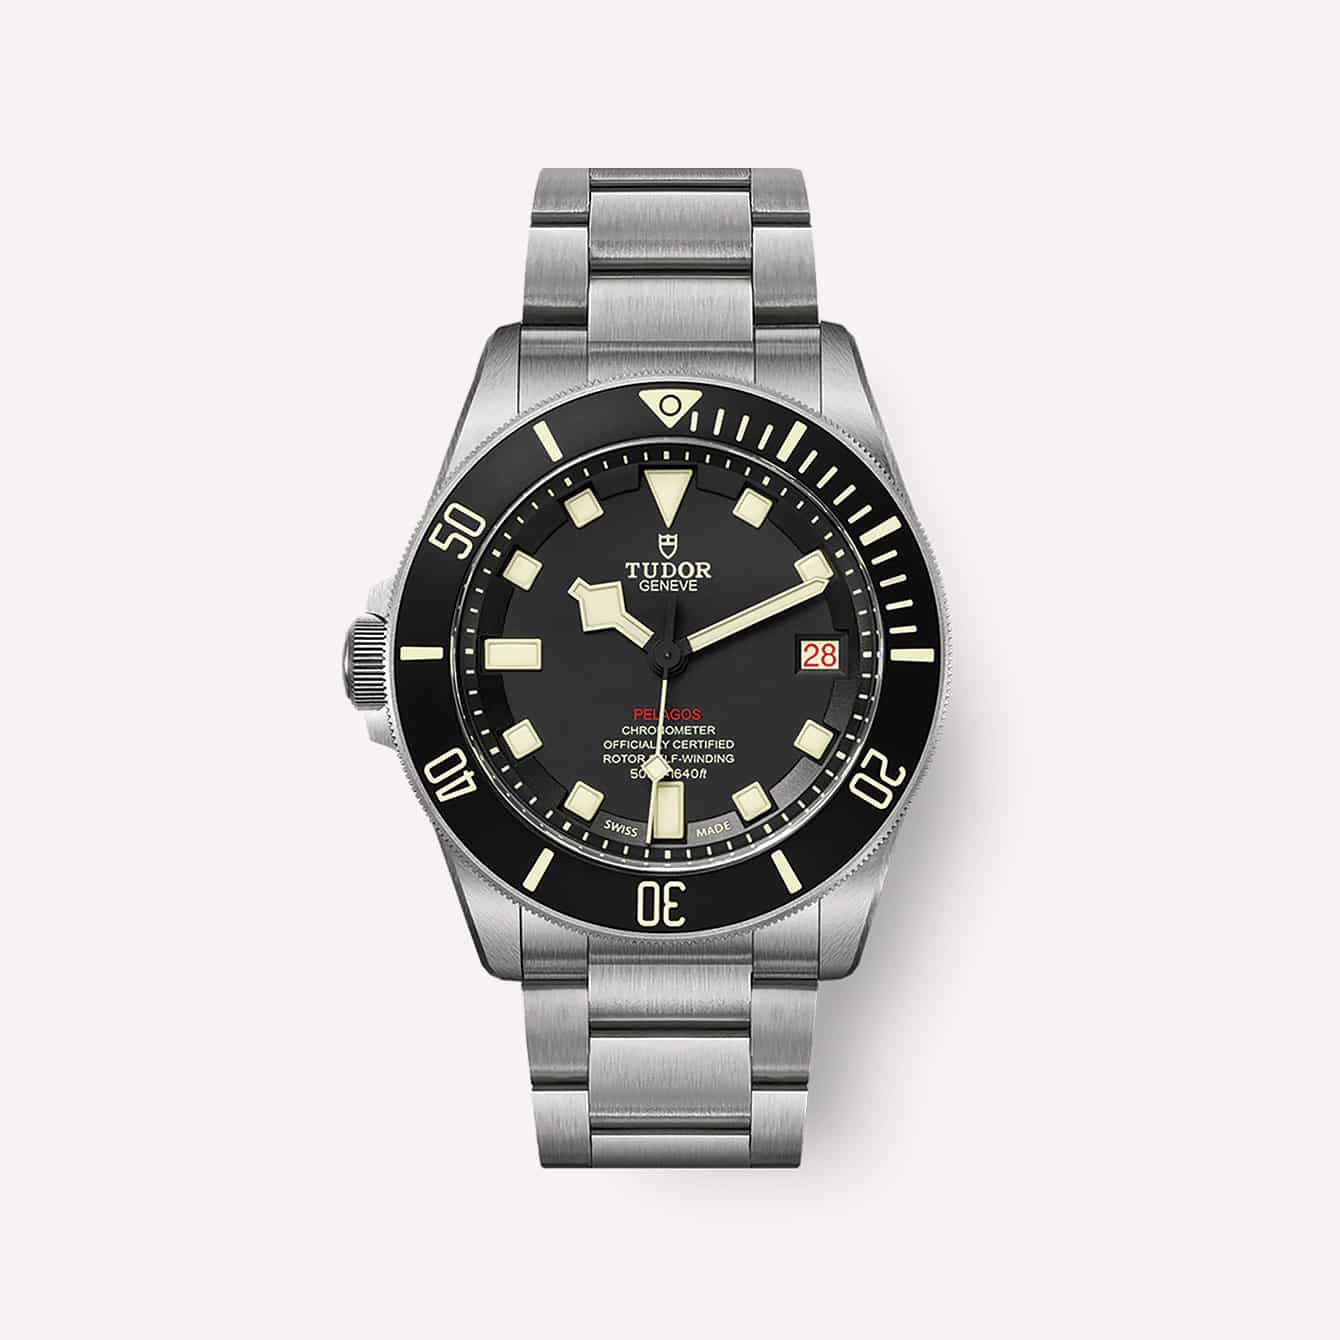 The 10 Best Tudor Watches (According to Experts)-11